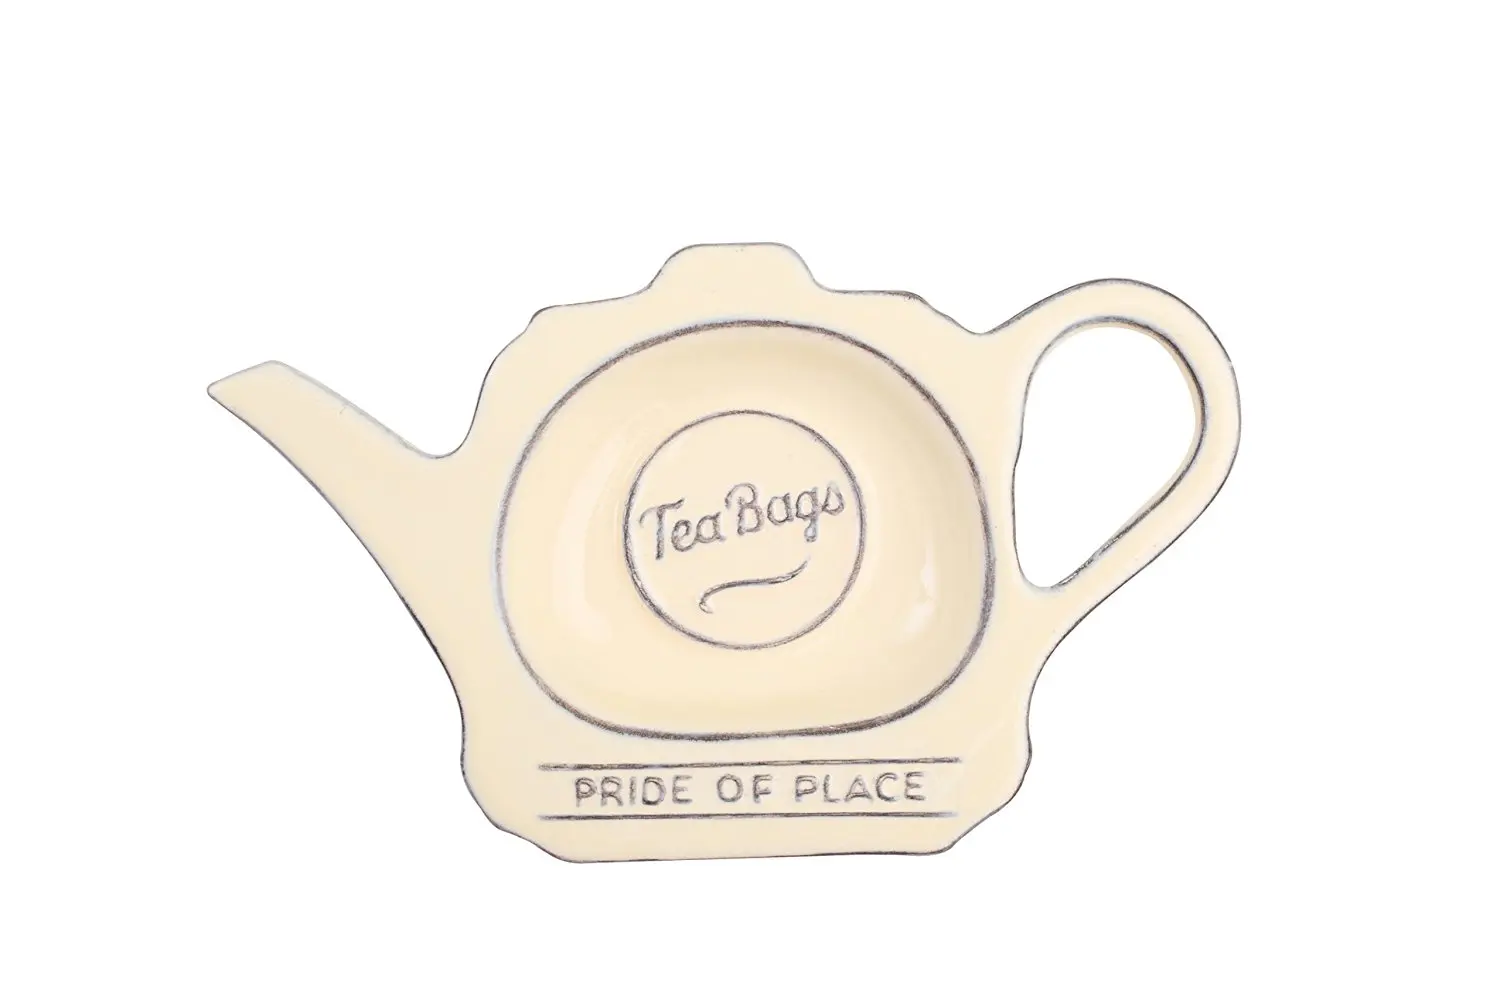 T & G Pride Of Place Tea Bag Coaster Tidy Holder Old Cream 18029 